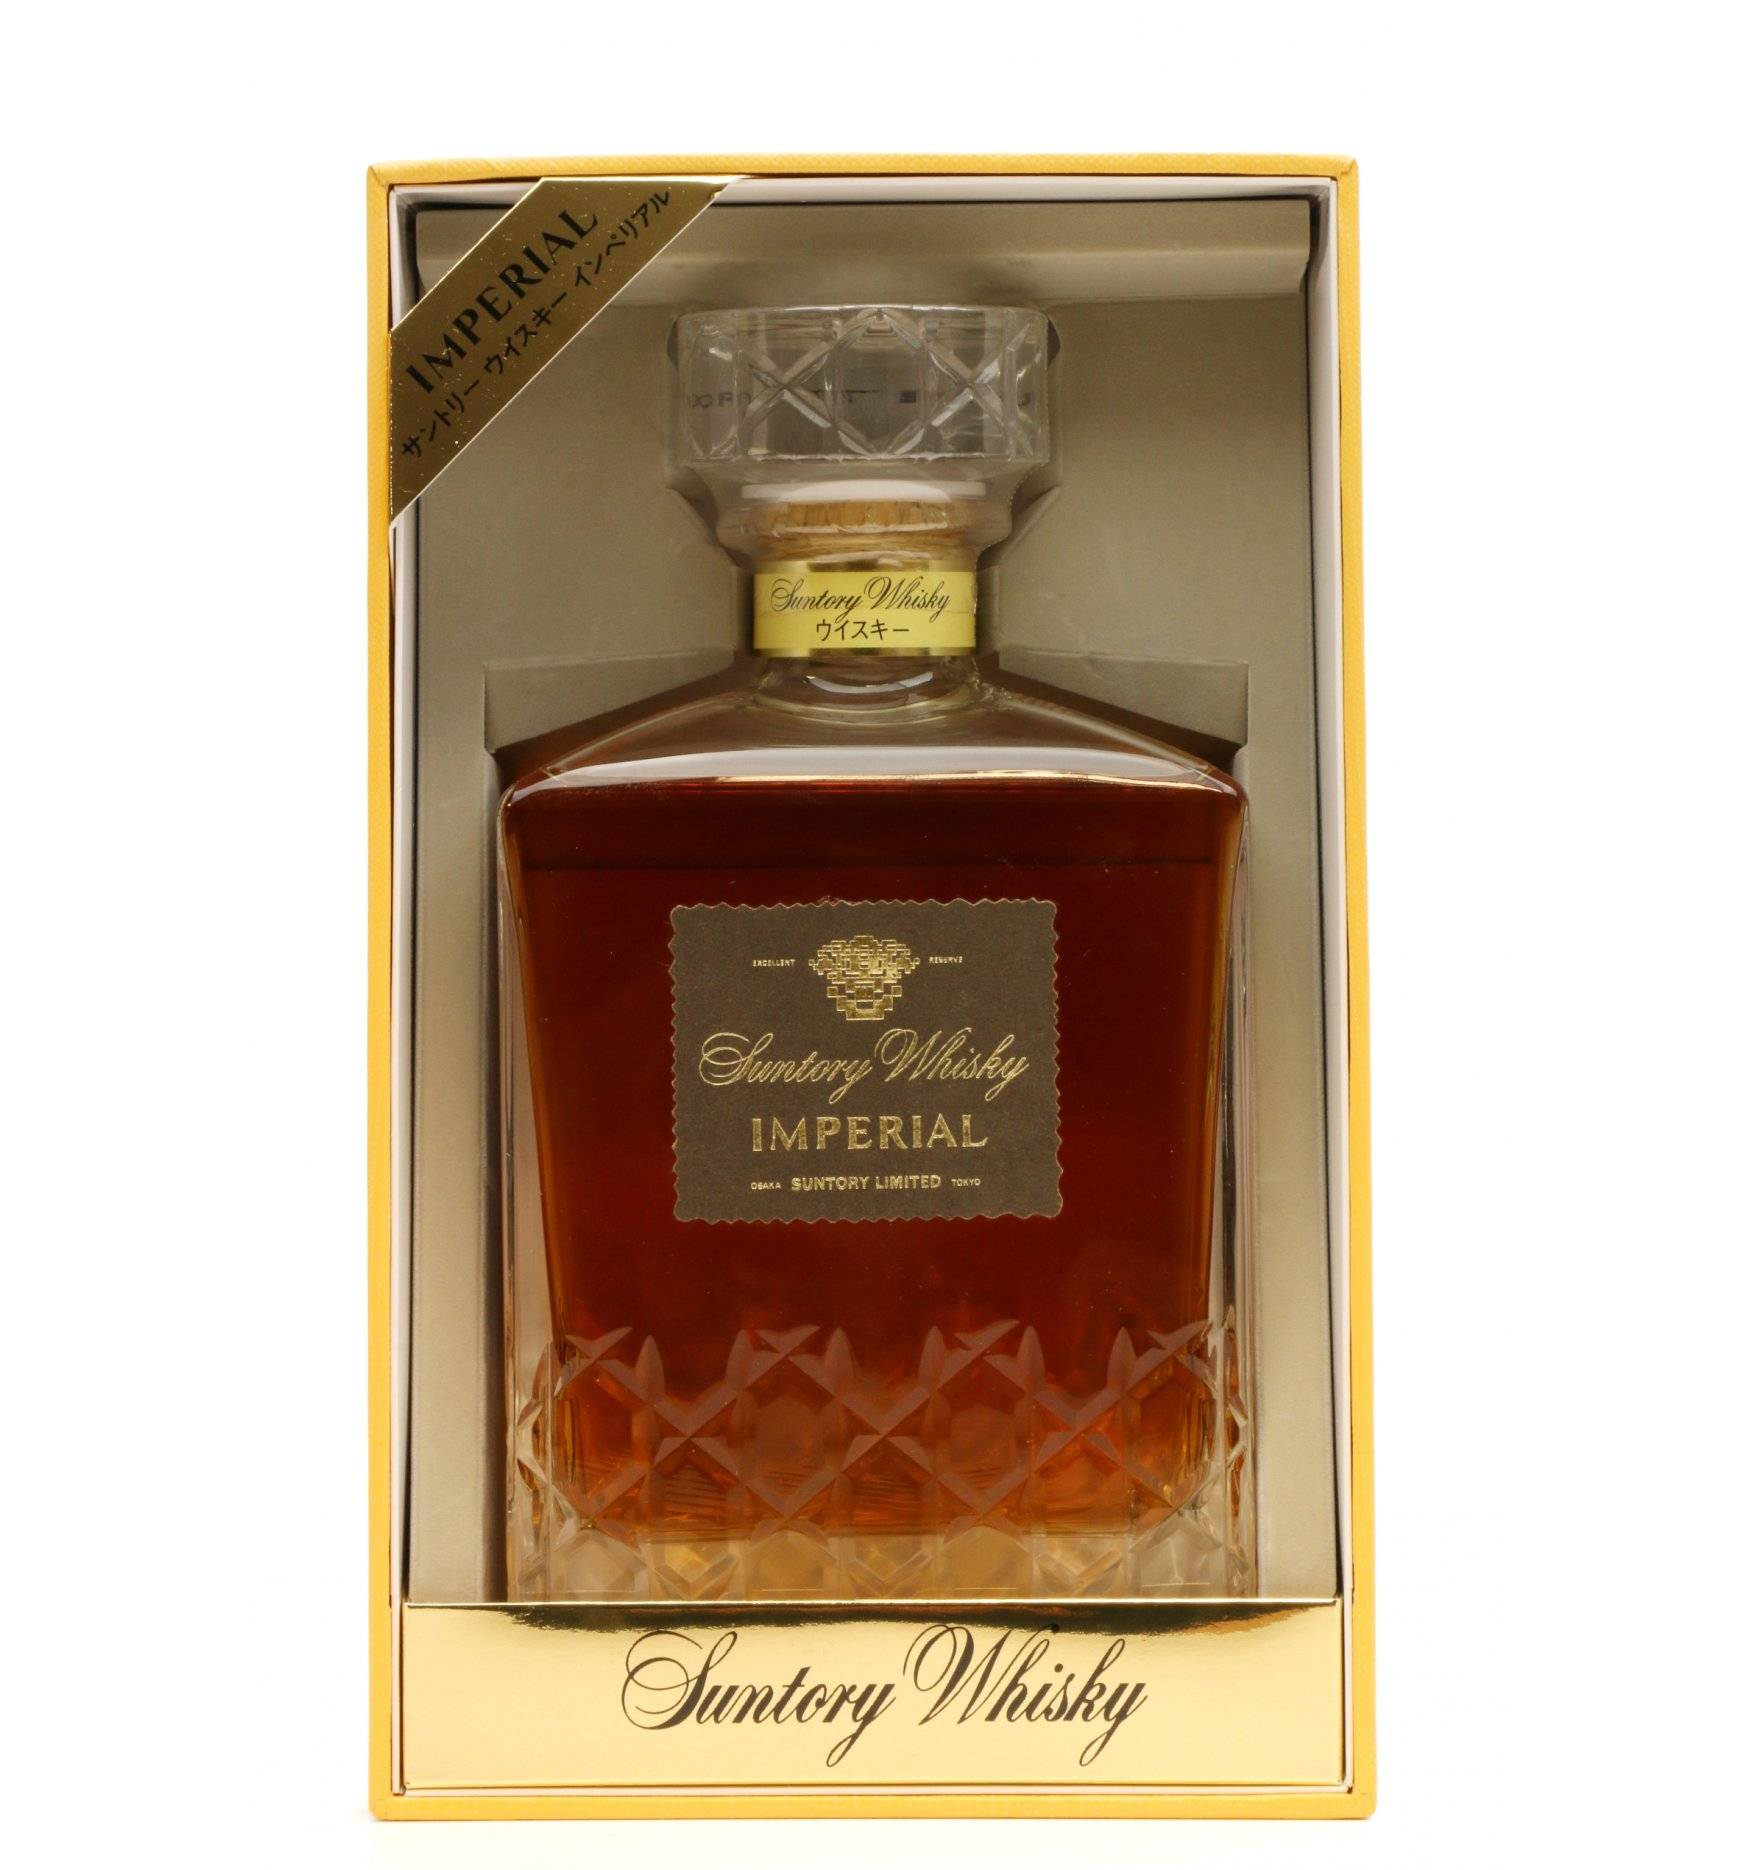 Suntory Whisky Imperial - Crystal Decanter (600ml) - Just Whisky